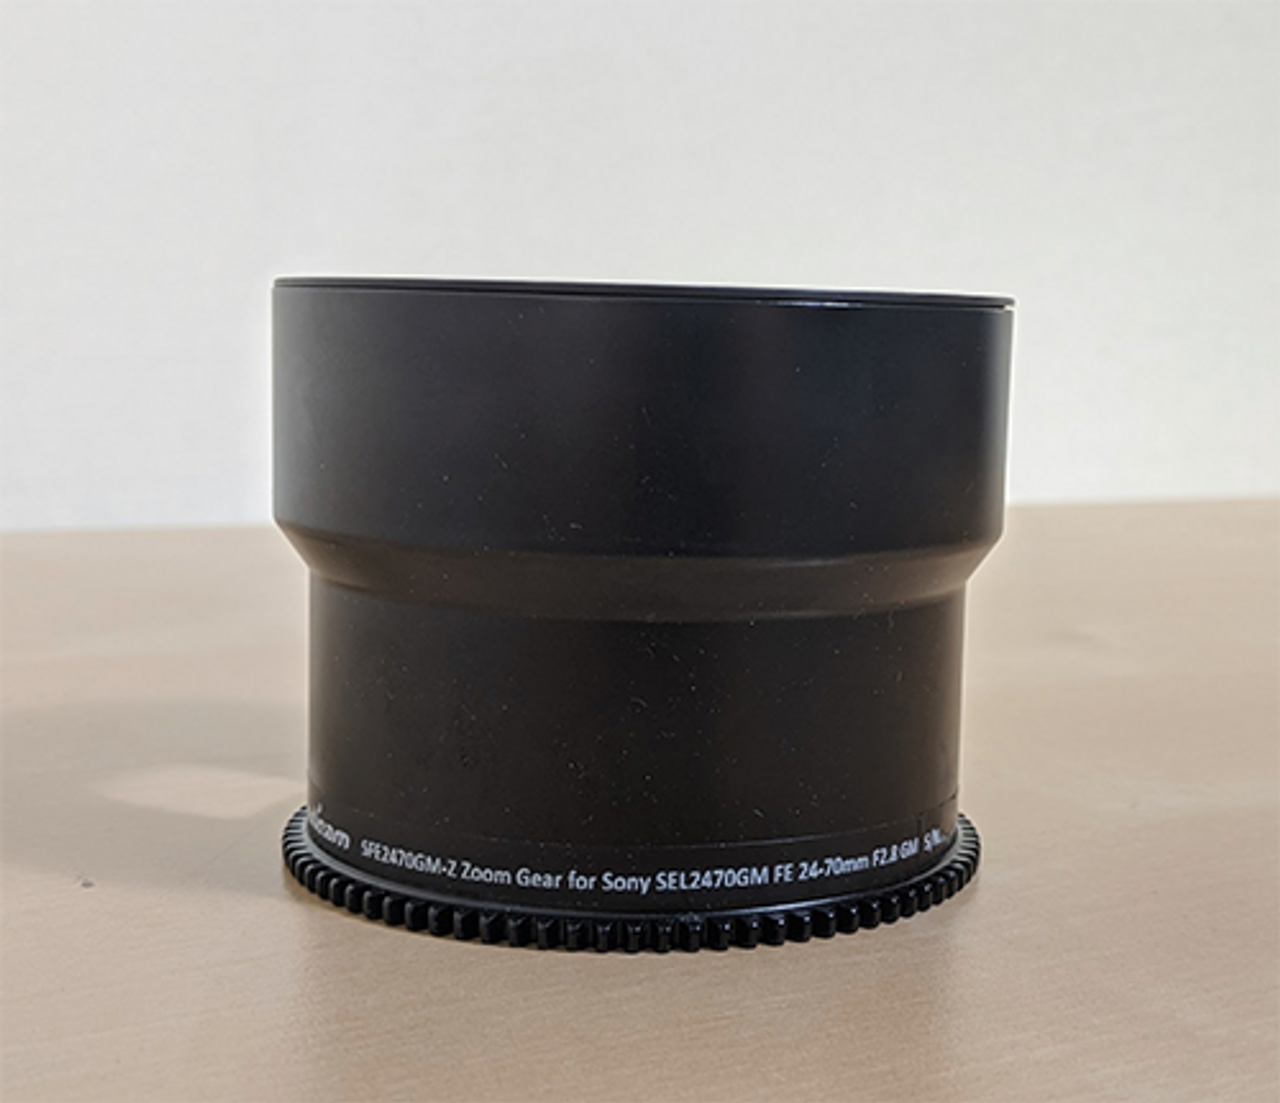 USED: Nauticam Zoom Gear for Sony 24-70mm F2.8 GM Lens